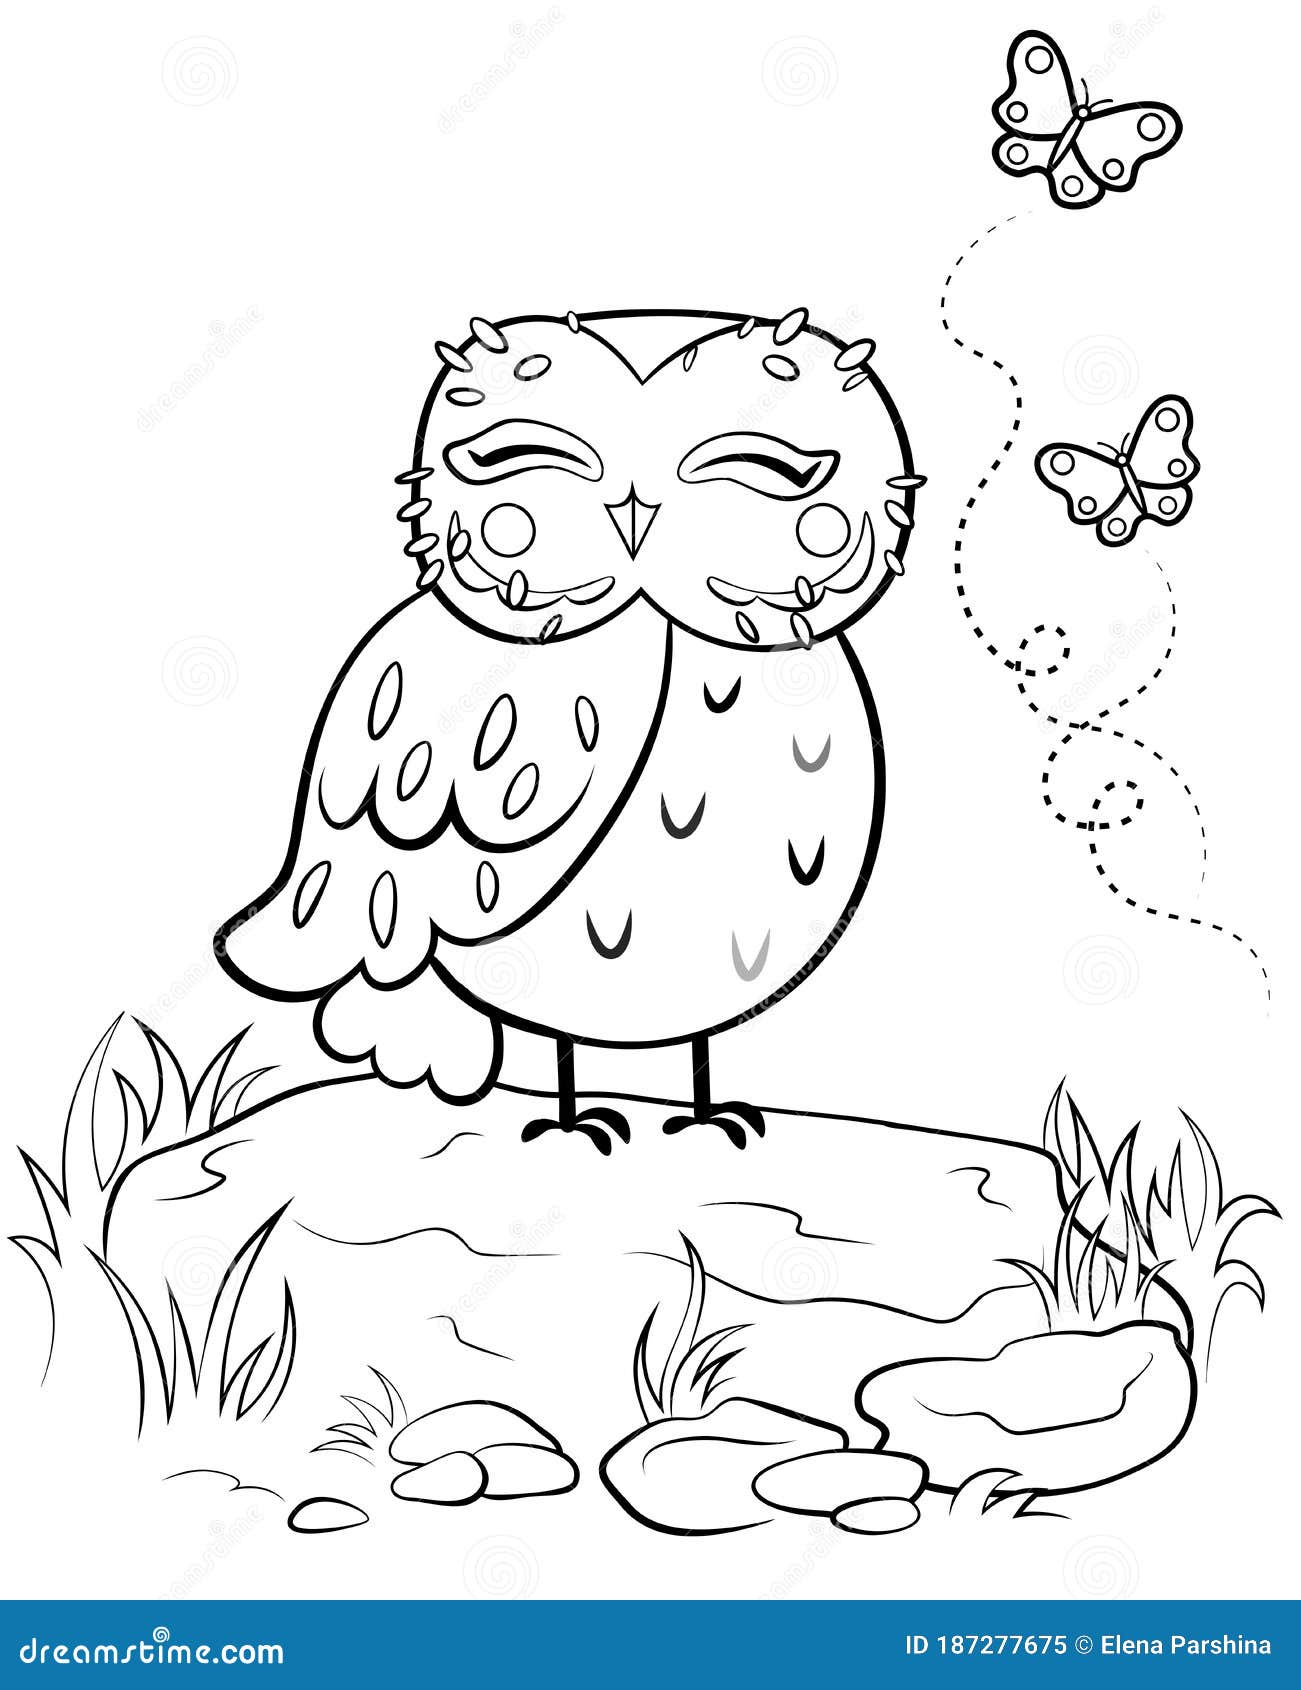 Printable coloring page outline of cute cartoon owl on stone with butterflies vector image with forest background stock vector